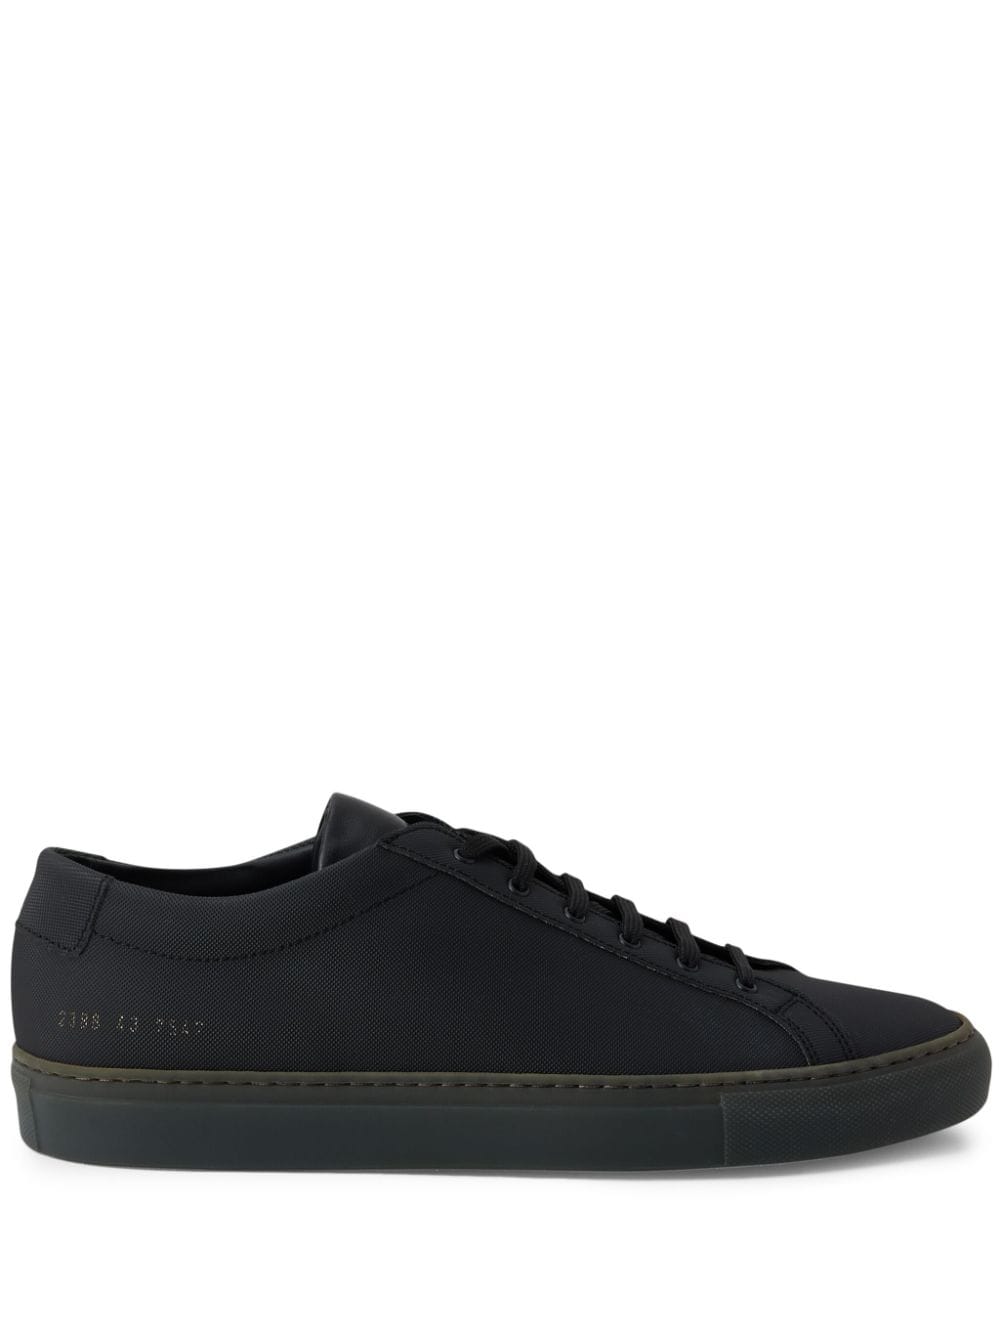 Common Projects Achilles Tech lace-up sneakers - Nero